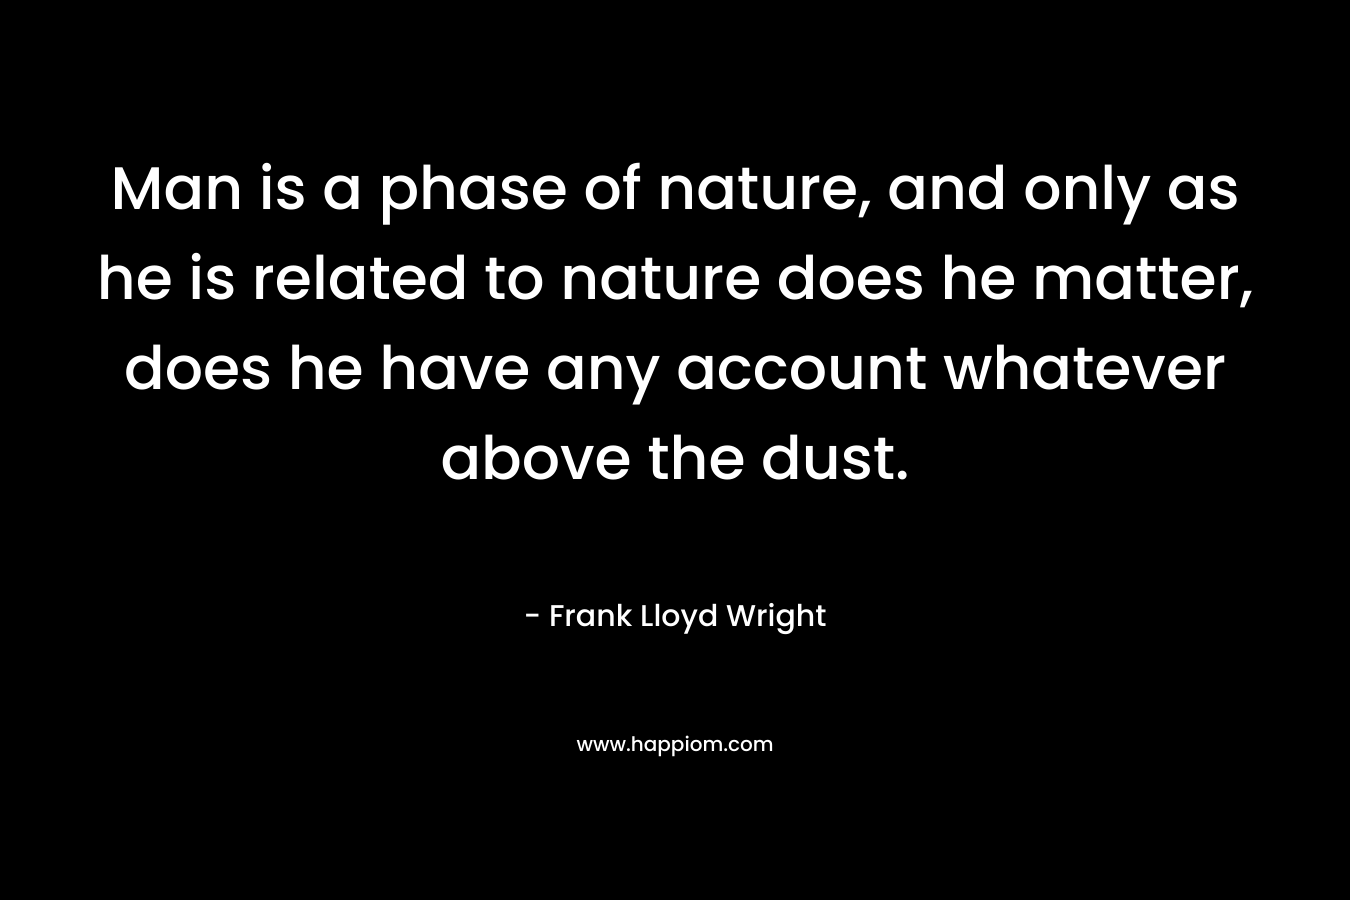 Man is a phase of nature, and only as he is related to nature does he matter, does he have any account whatever above the dust. – Frank Lloyd Wright